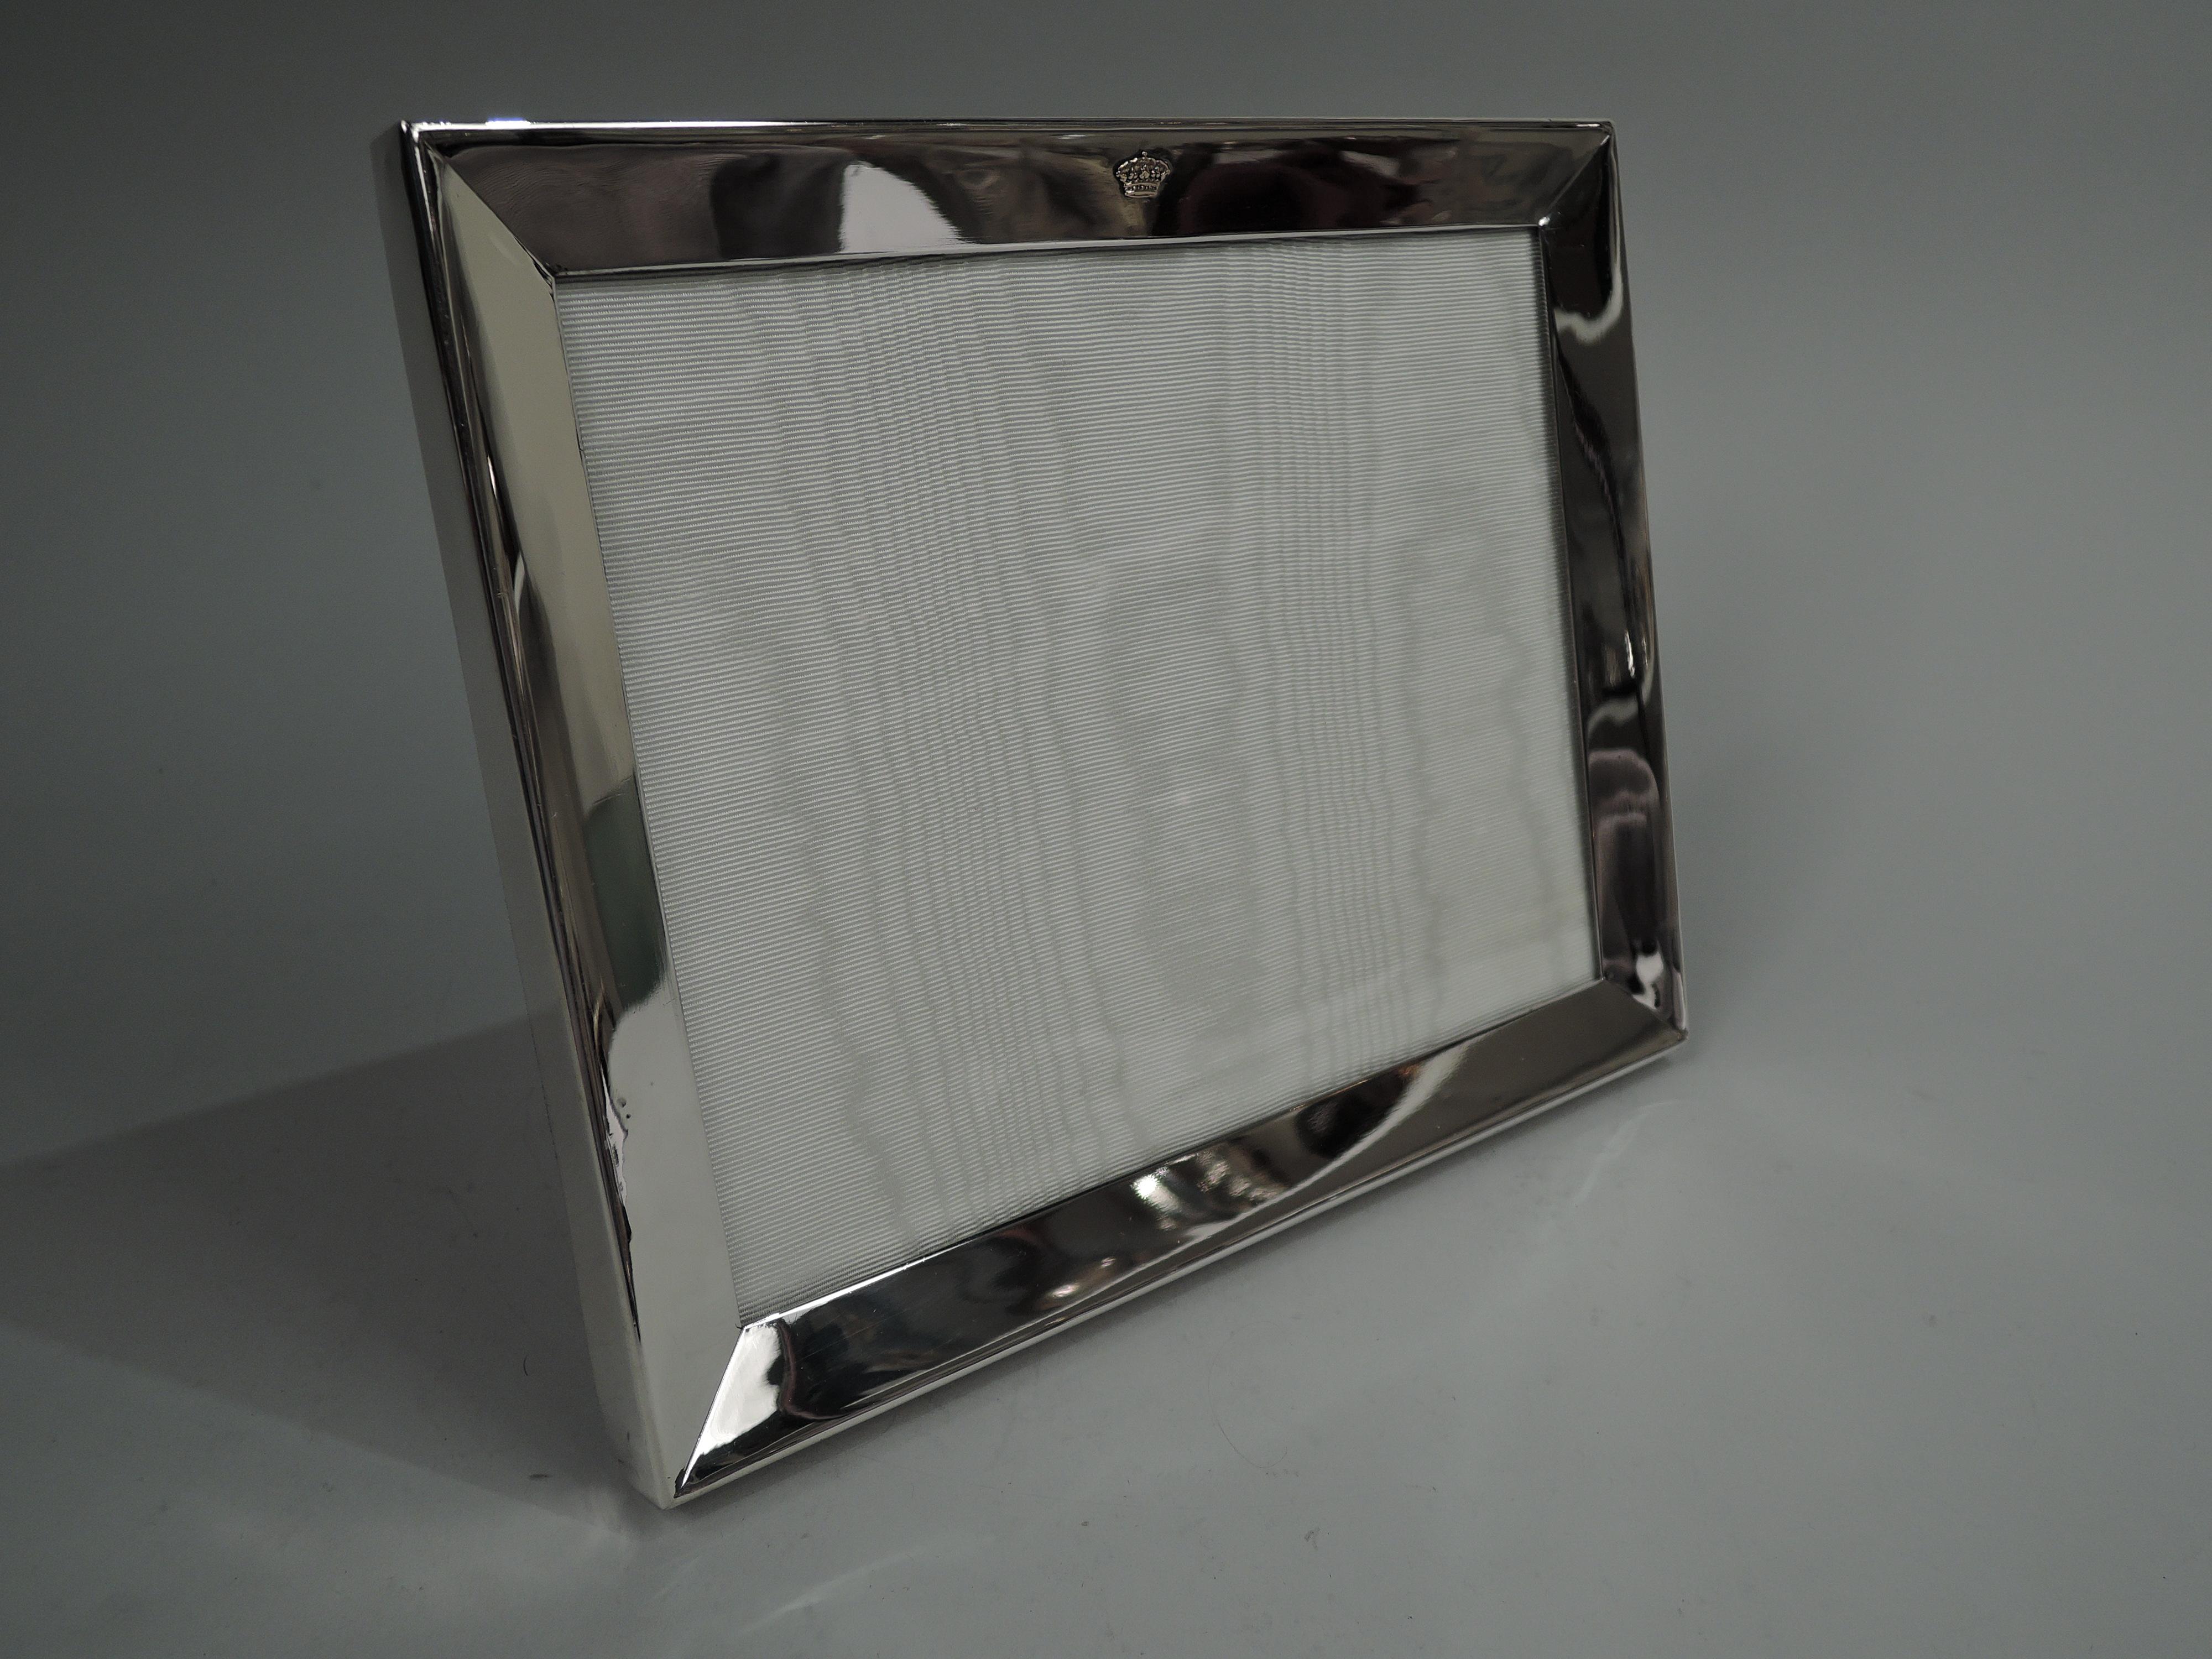 American Midcentury Modern sterling silver picture frame. Retailed by Cartier in New York. Rectangular window in same surround with convex front and flat sides. In hard-to-find landscape form with regal gold crown applied to top rail. With glass,